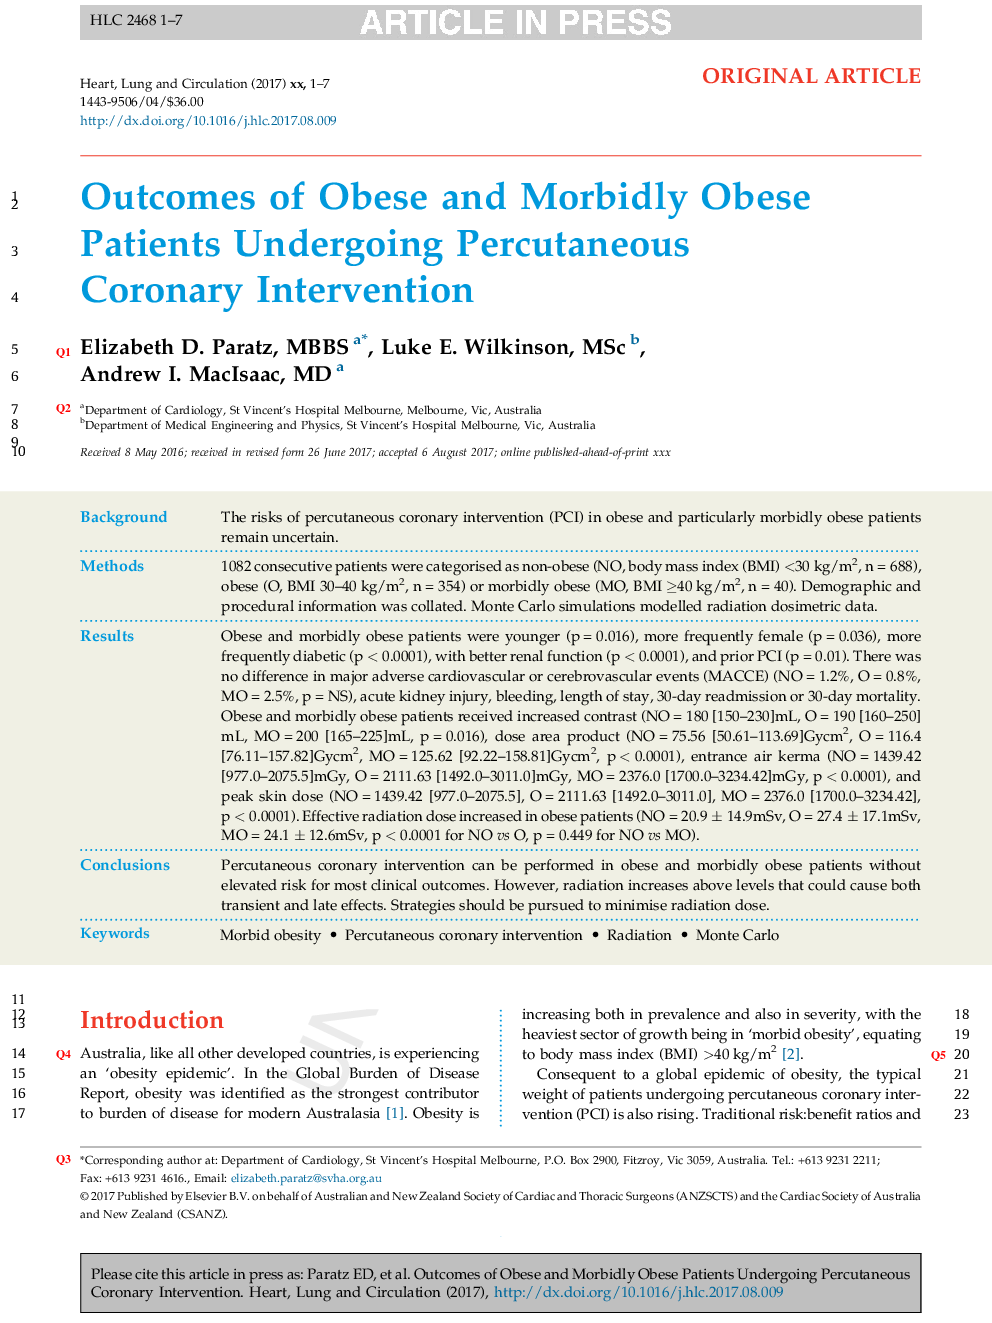 Outcomes of Obese and Morbidly Obese Patients Undergoing Percutaneous Coronary Intervention